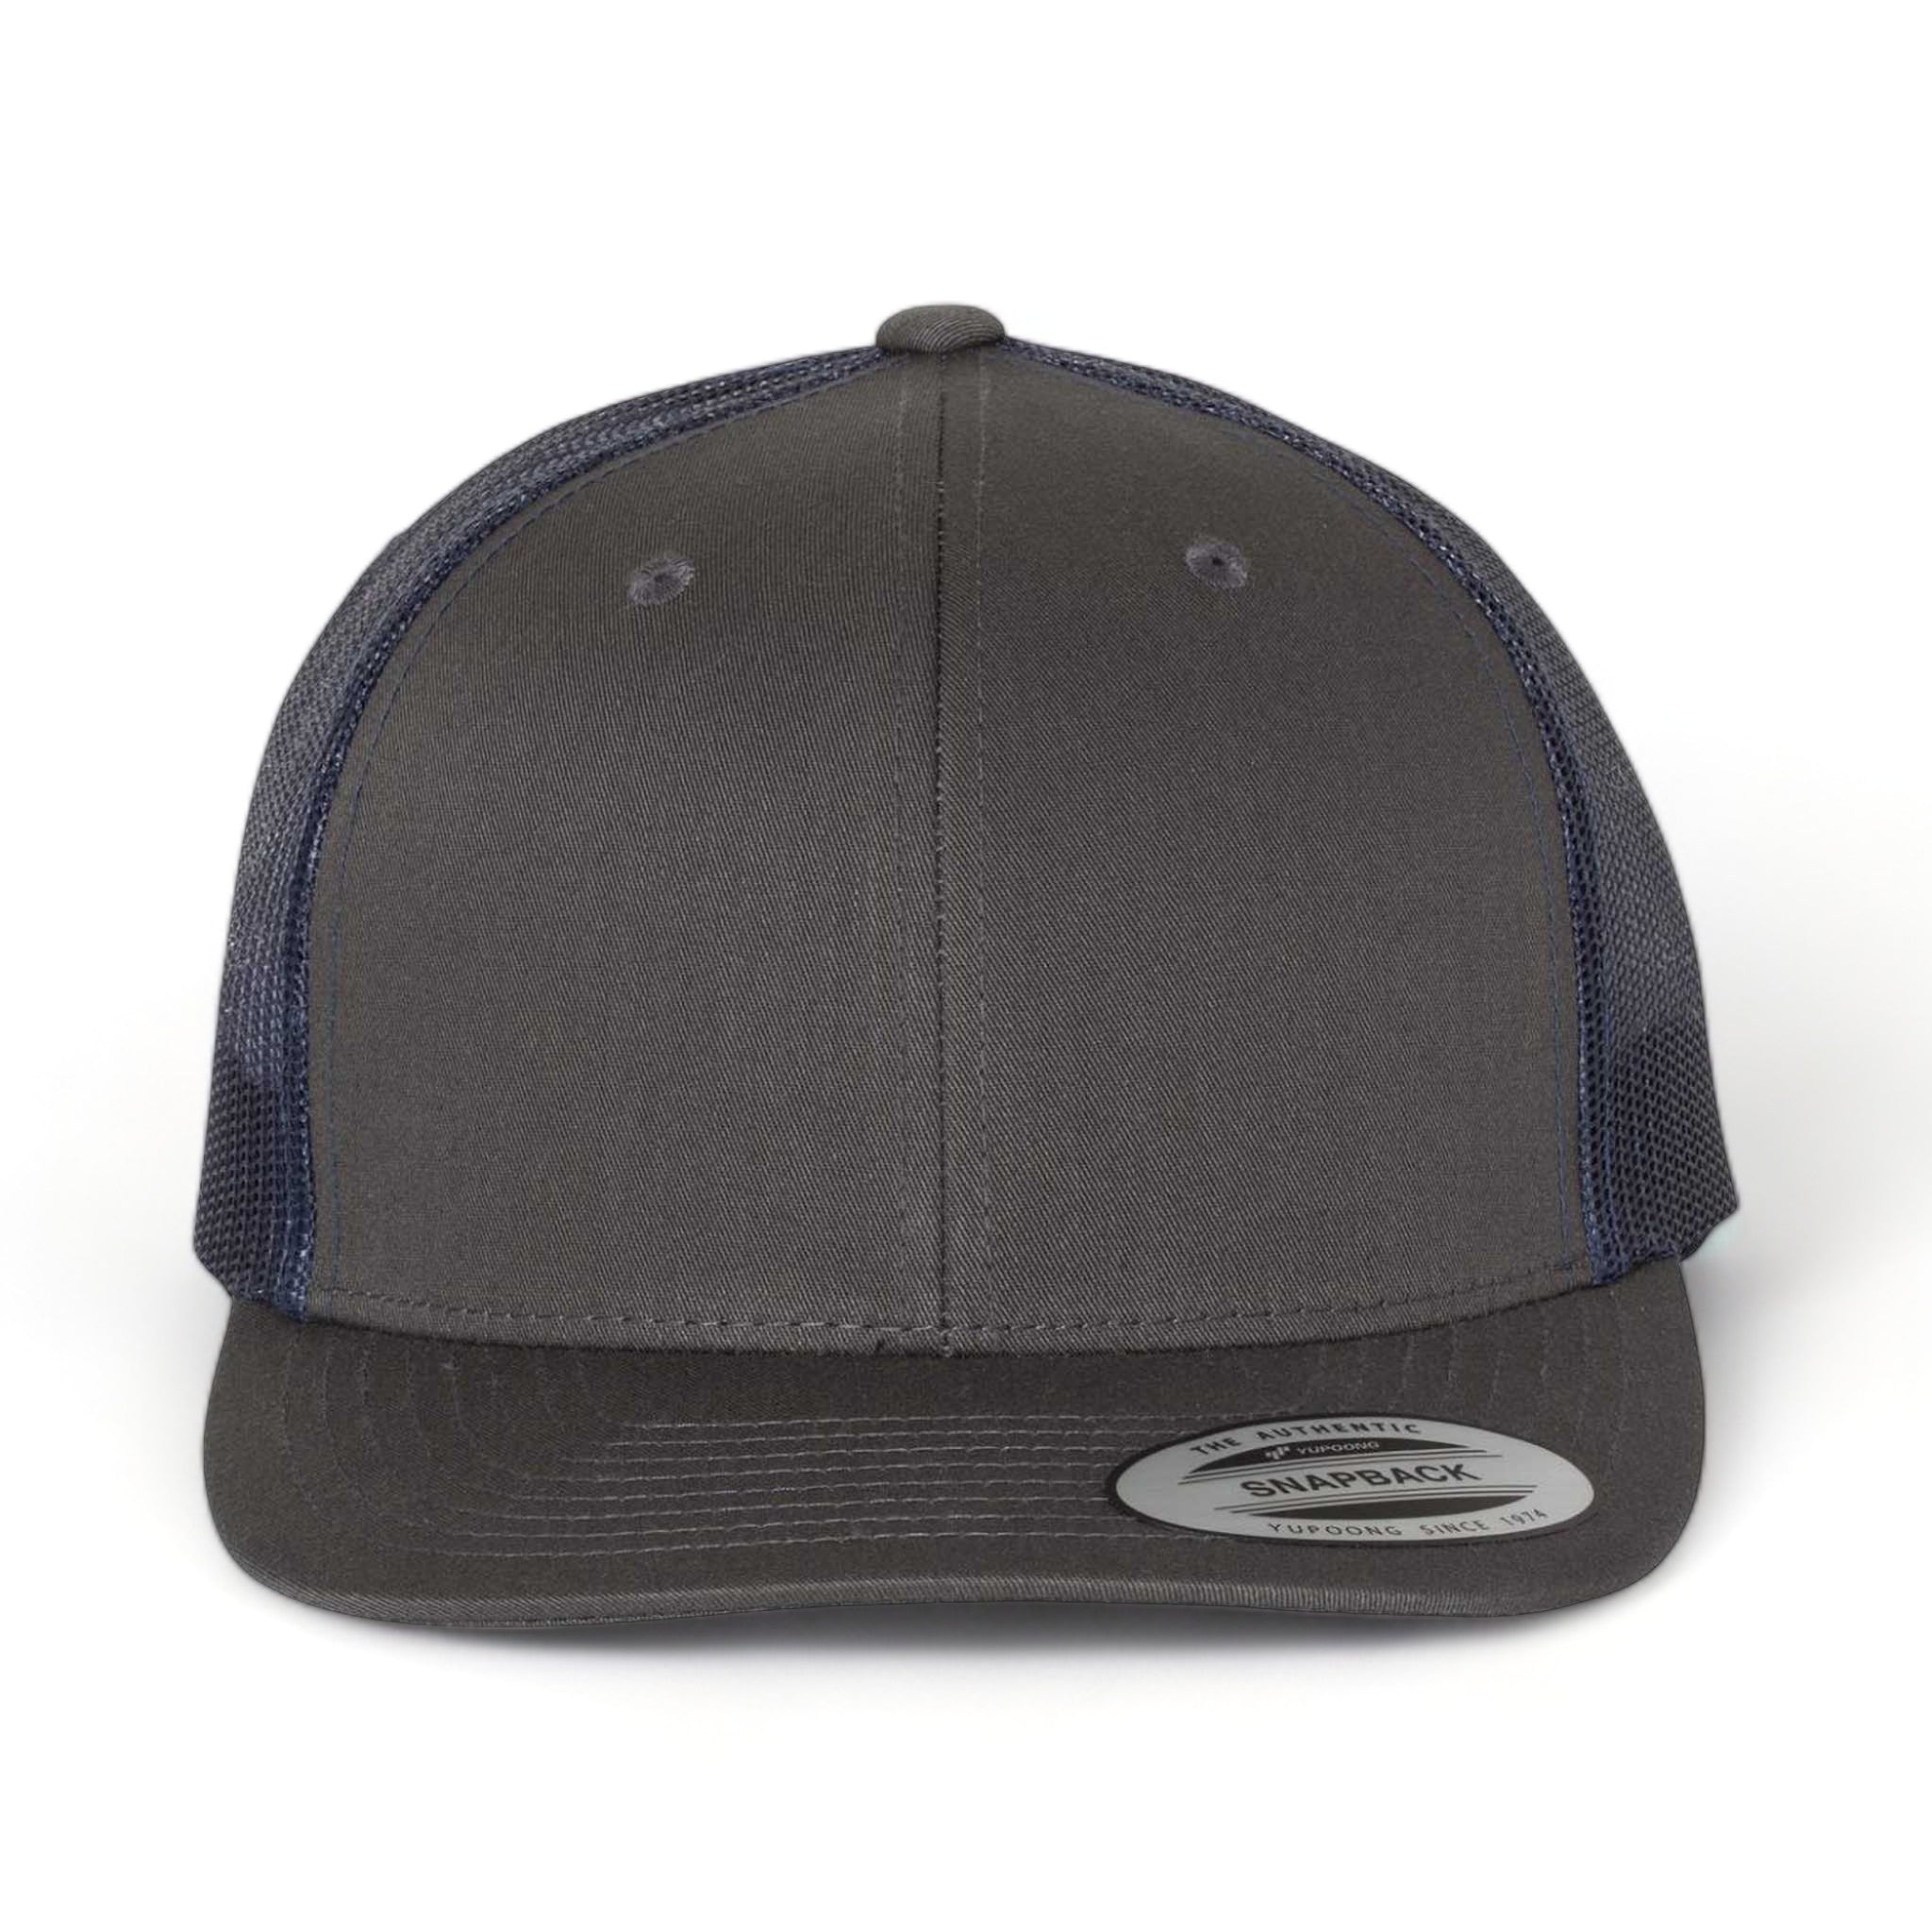 Front view of YP Classics 6606 custom hat in charcoal and navy